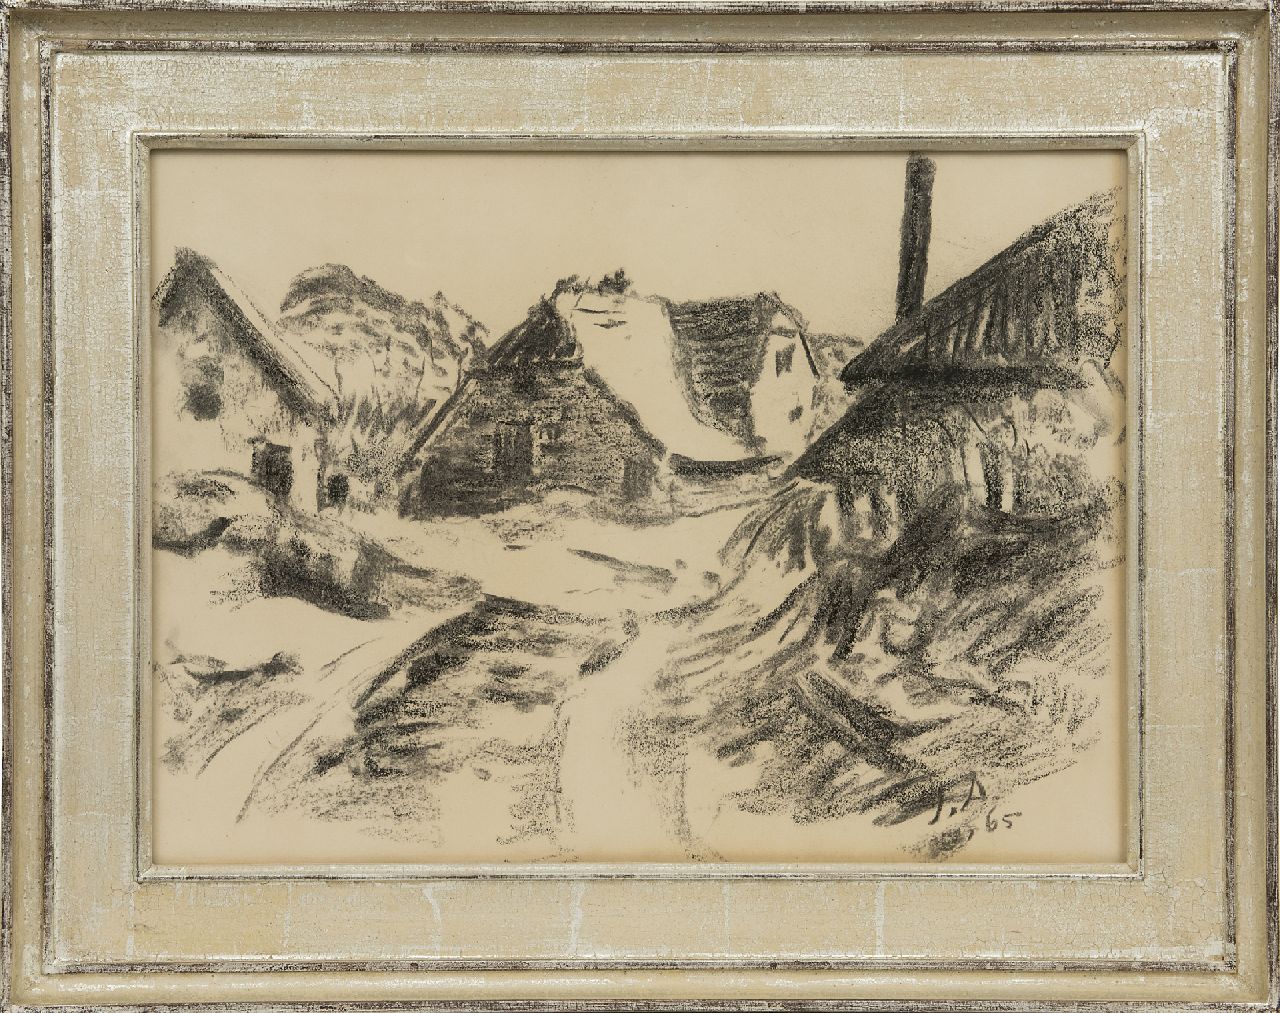 Altink J.  | Jan Altink, Farms, charcoal on paper 36.7 x 48.8 cm, signed l.r. with initials and dated '65